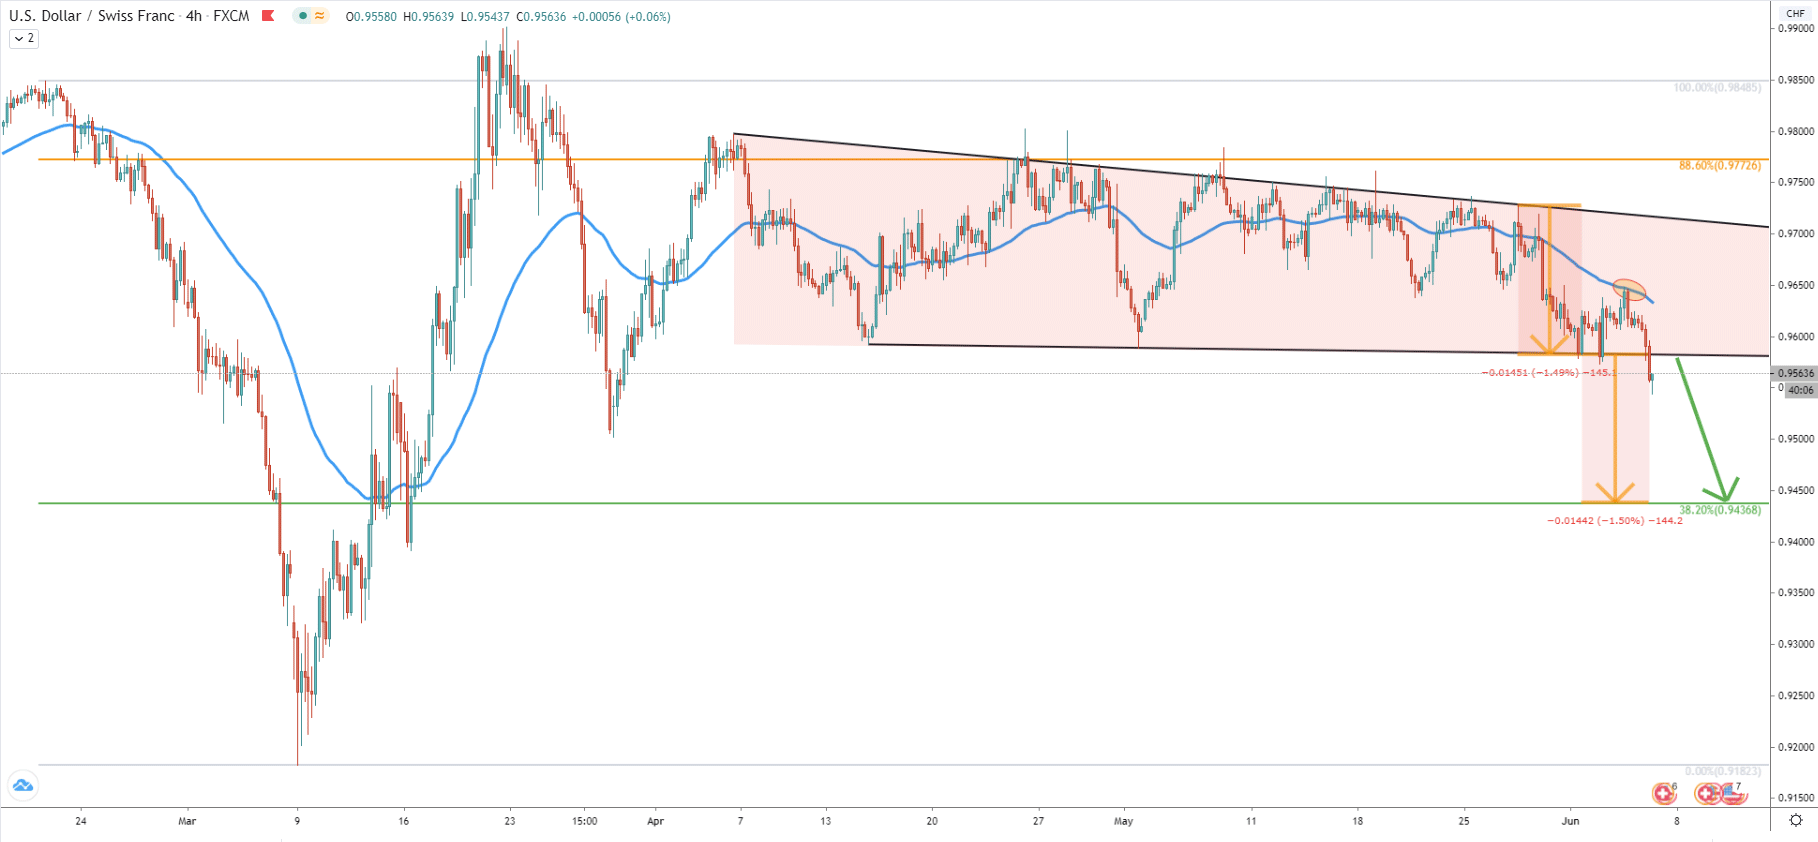 USD/CHF 4-Hour Technical Analysis 4 June 2020